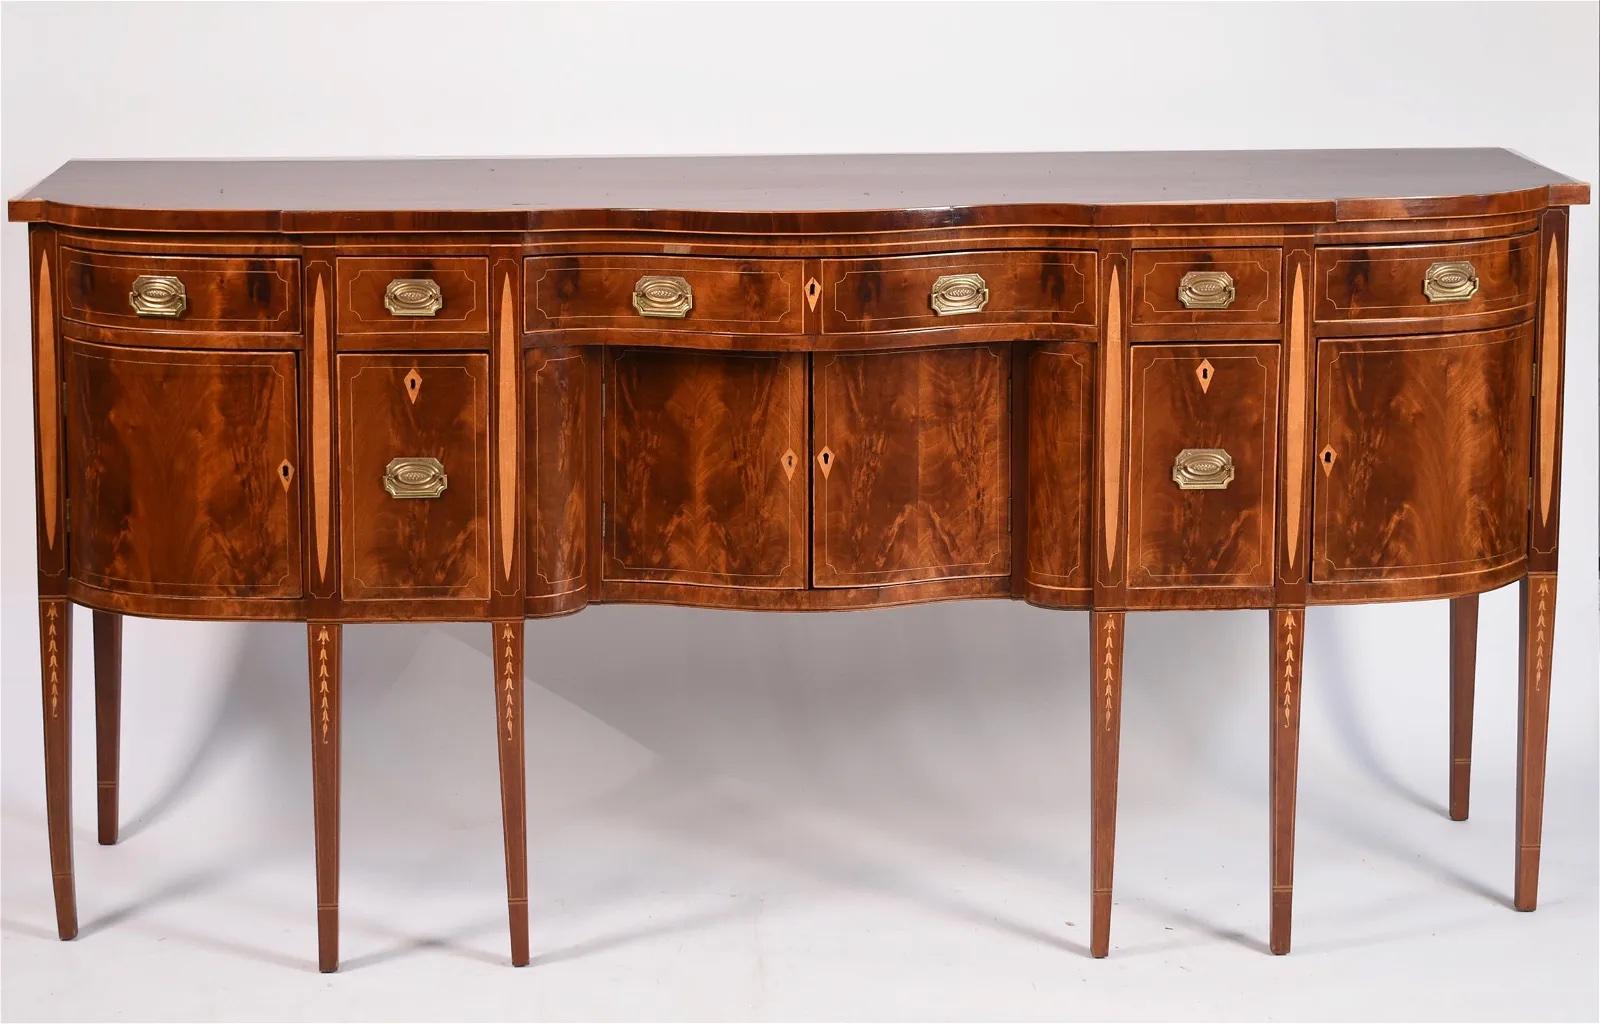 Antique Mahogany Hepplewhite Baltimore Federal Serpentine Front Sideboard, with oval and bellflower inlay, the front facade has four drawers over two central doors flanked by two bottle drawers and another bowed doors. 

A Fine American Period